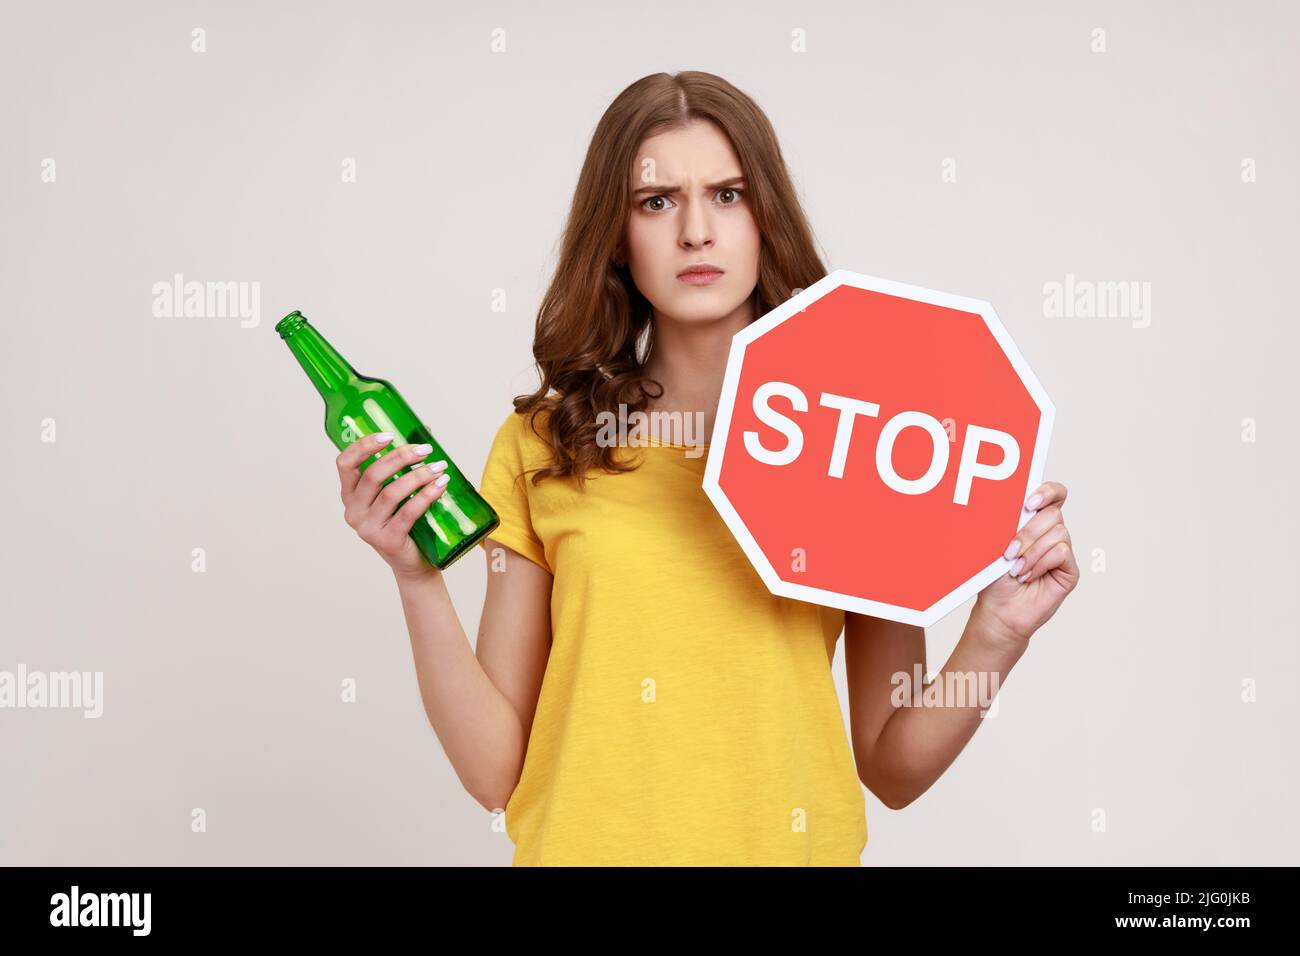 Stop drinking alcohol. Serious teenager girl in yellow T-shirt holding red stop sign and alcohol bottle, looking at camera strict expression. Indoor studio shot isolated on gray background. Stock Photo